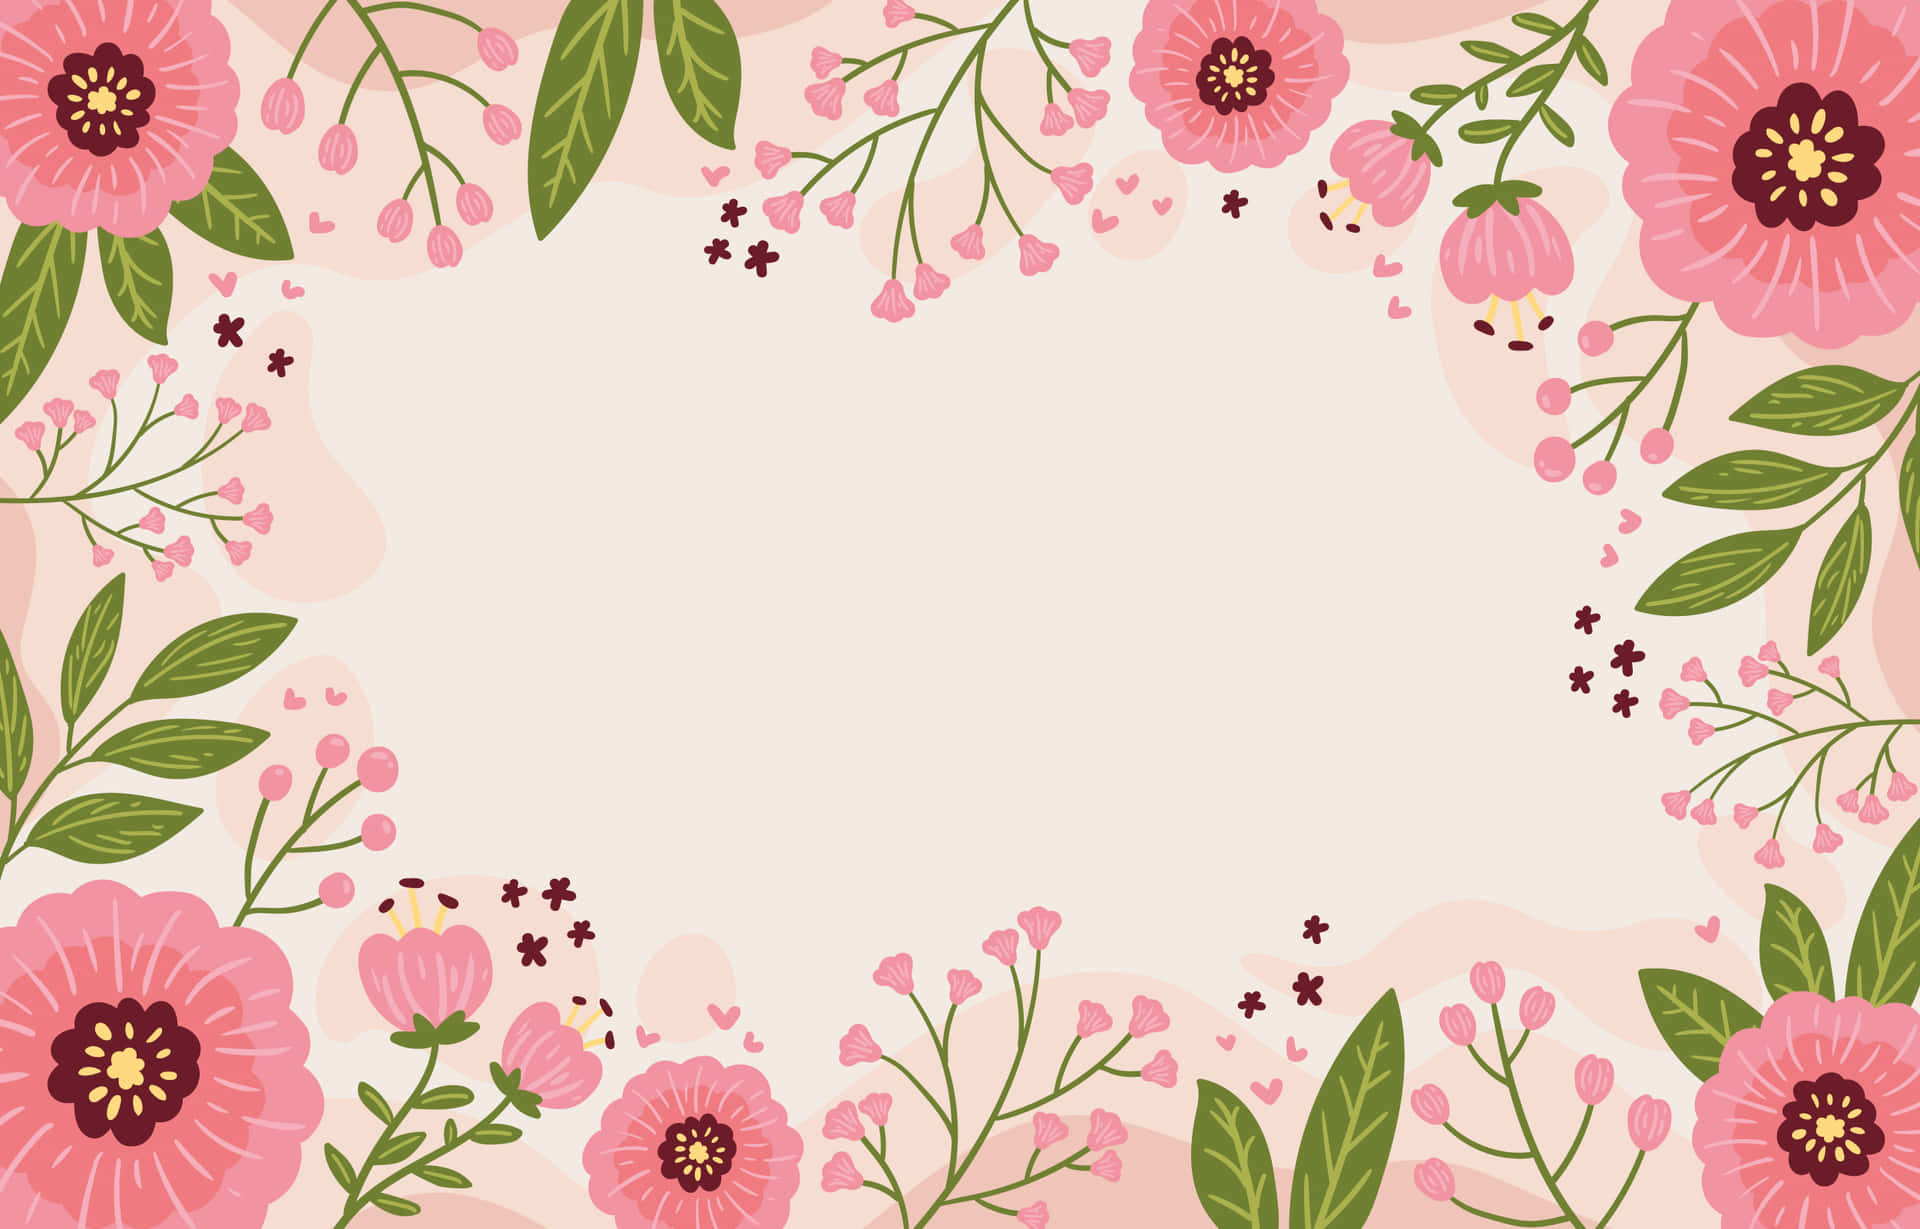 A vibrant and colorful watercolor floral background.